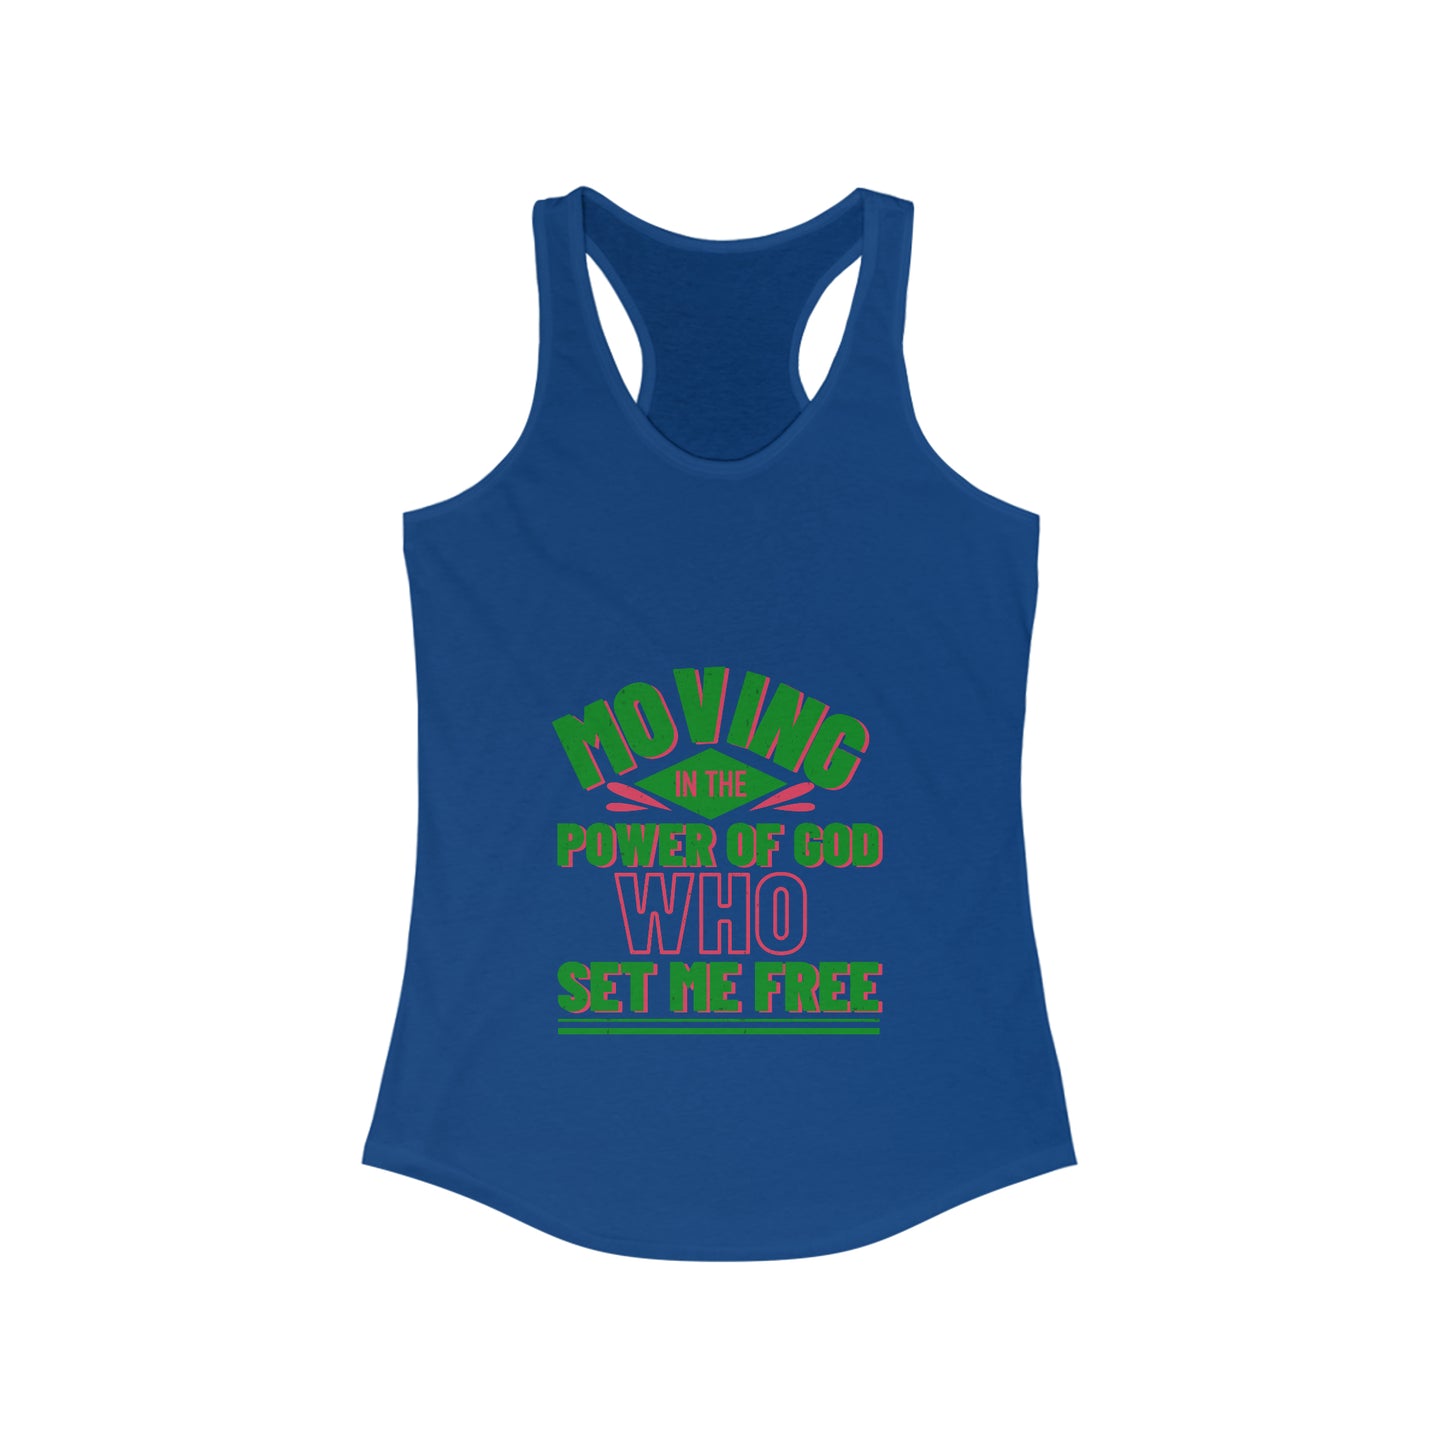 Moving In The Power Of God Who Set Me Free Slim Fit Tank-top